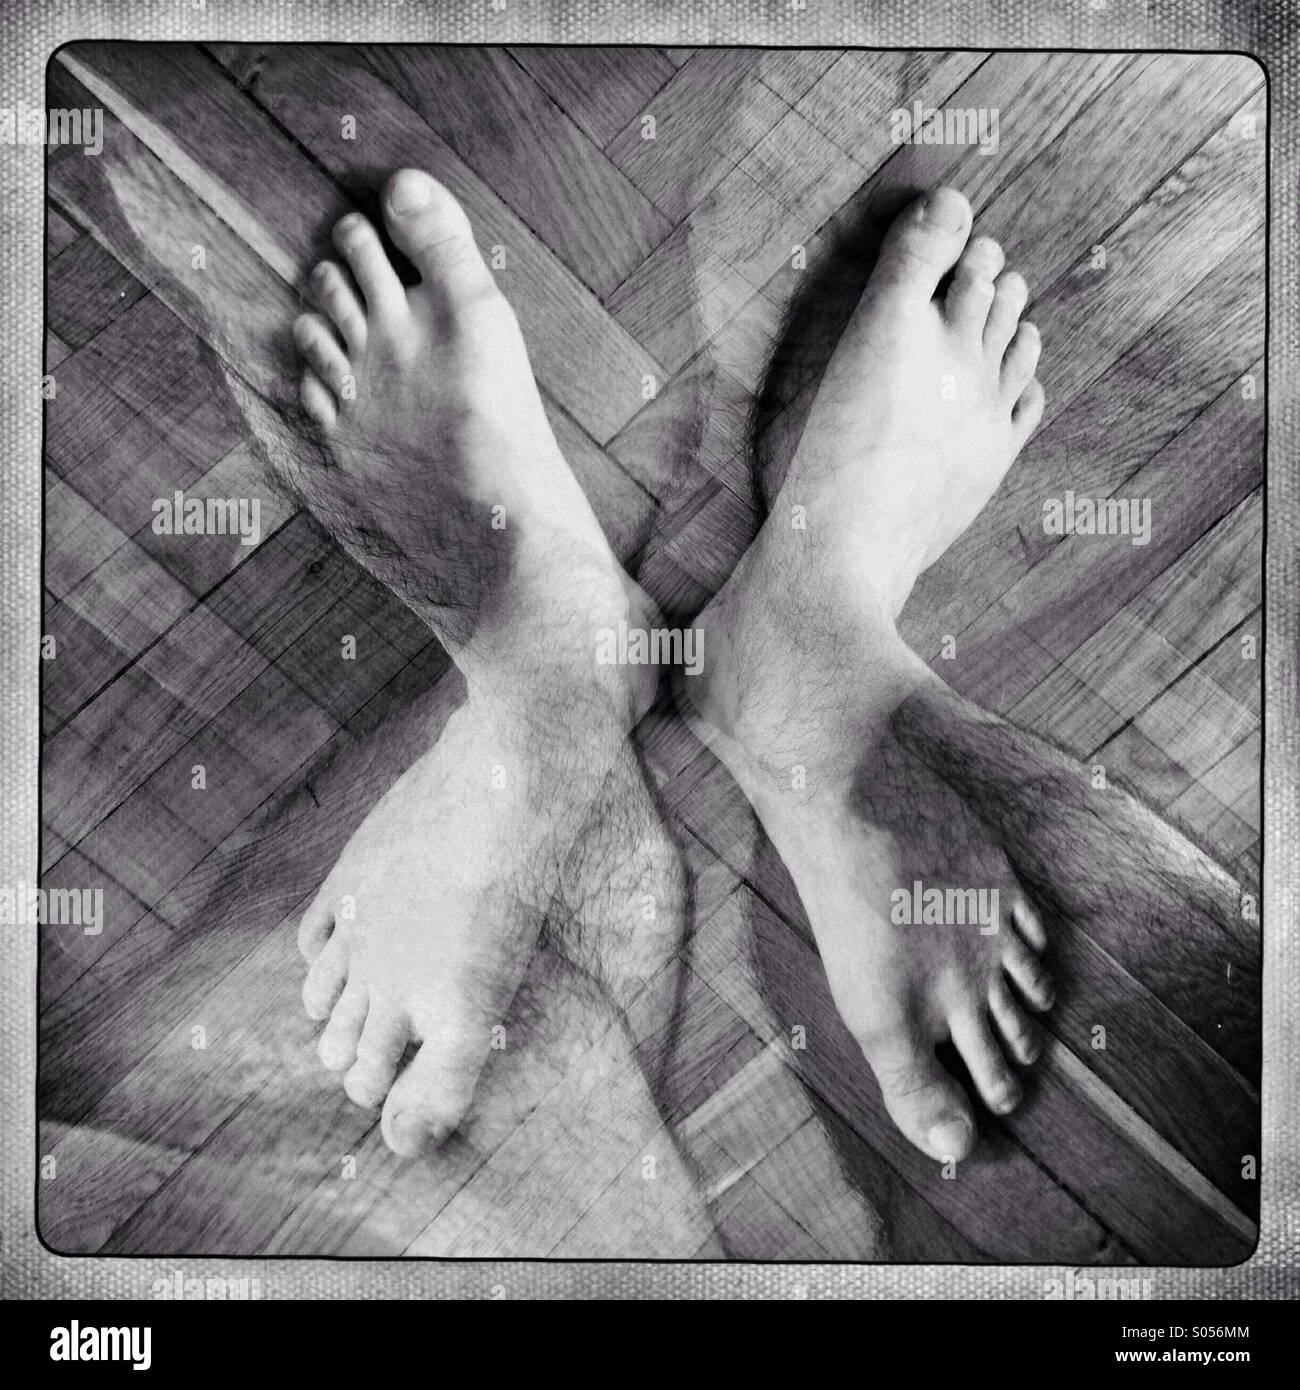 A pair of feet is seen in a double exposure. Stock Photo